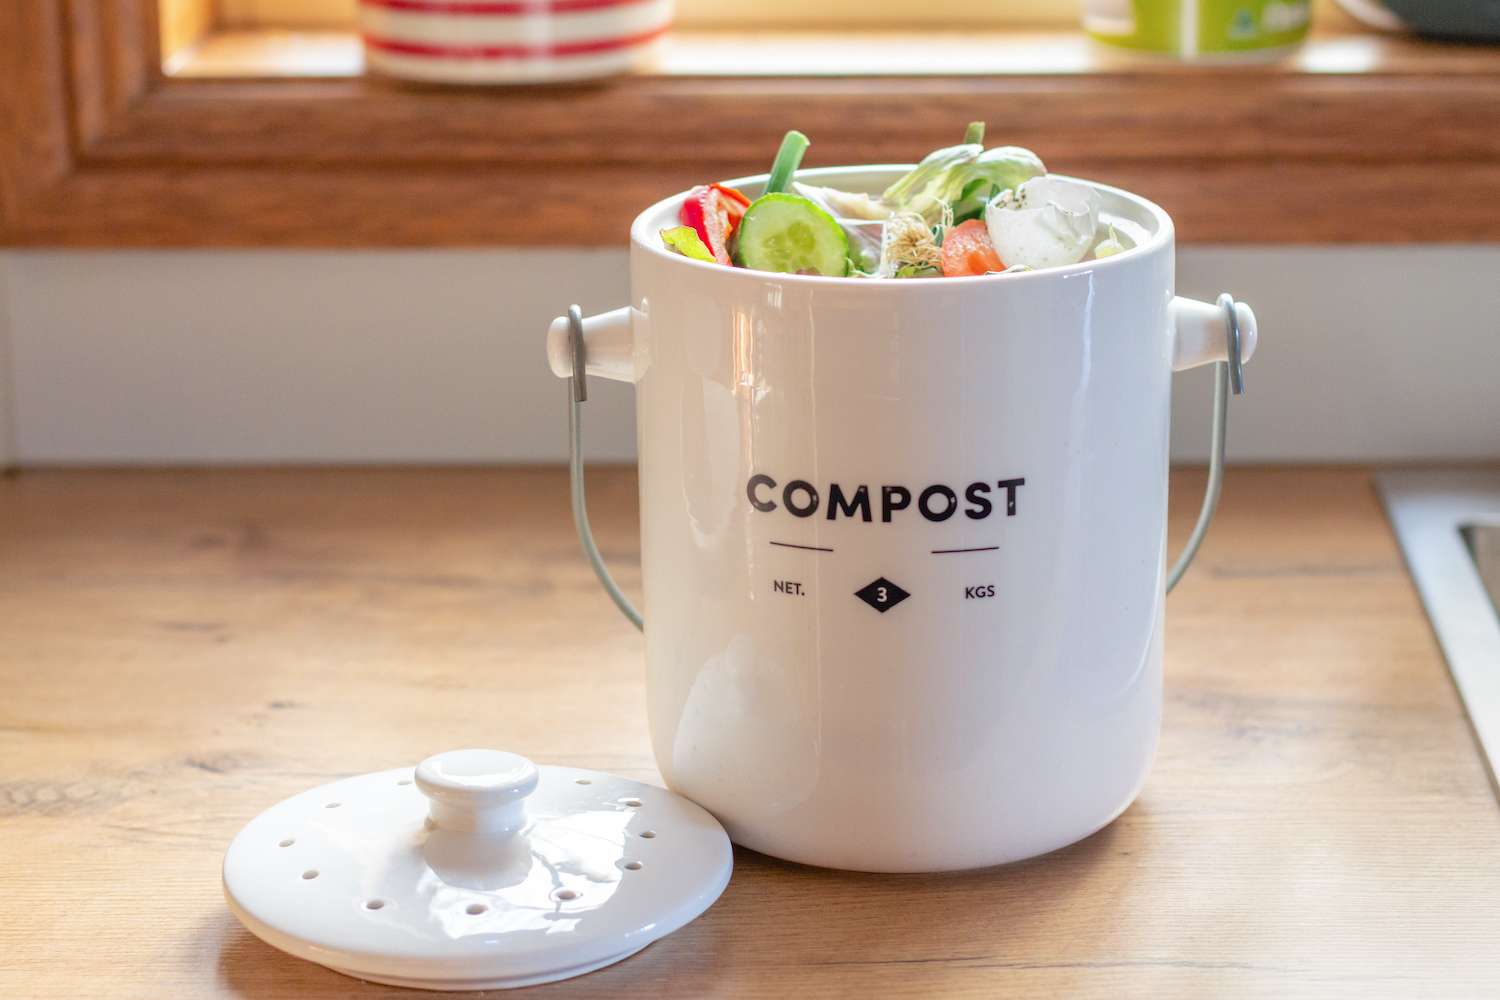 kitchen waste compost pot containing kitchen waste on kitchen counter top, sustainable living organic waste recycling,